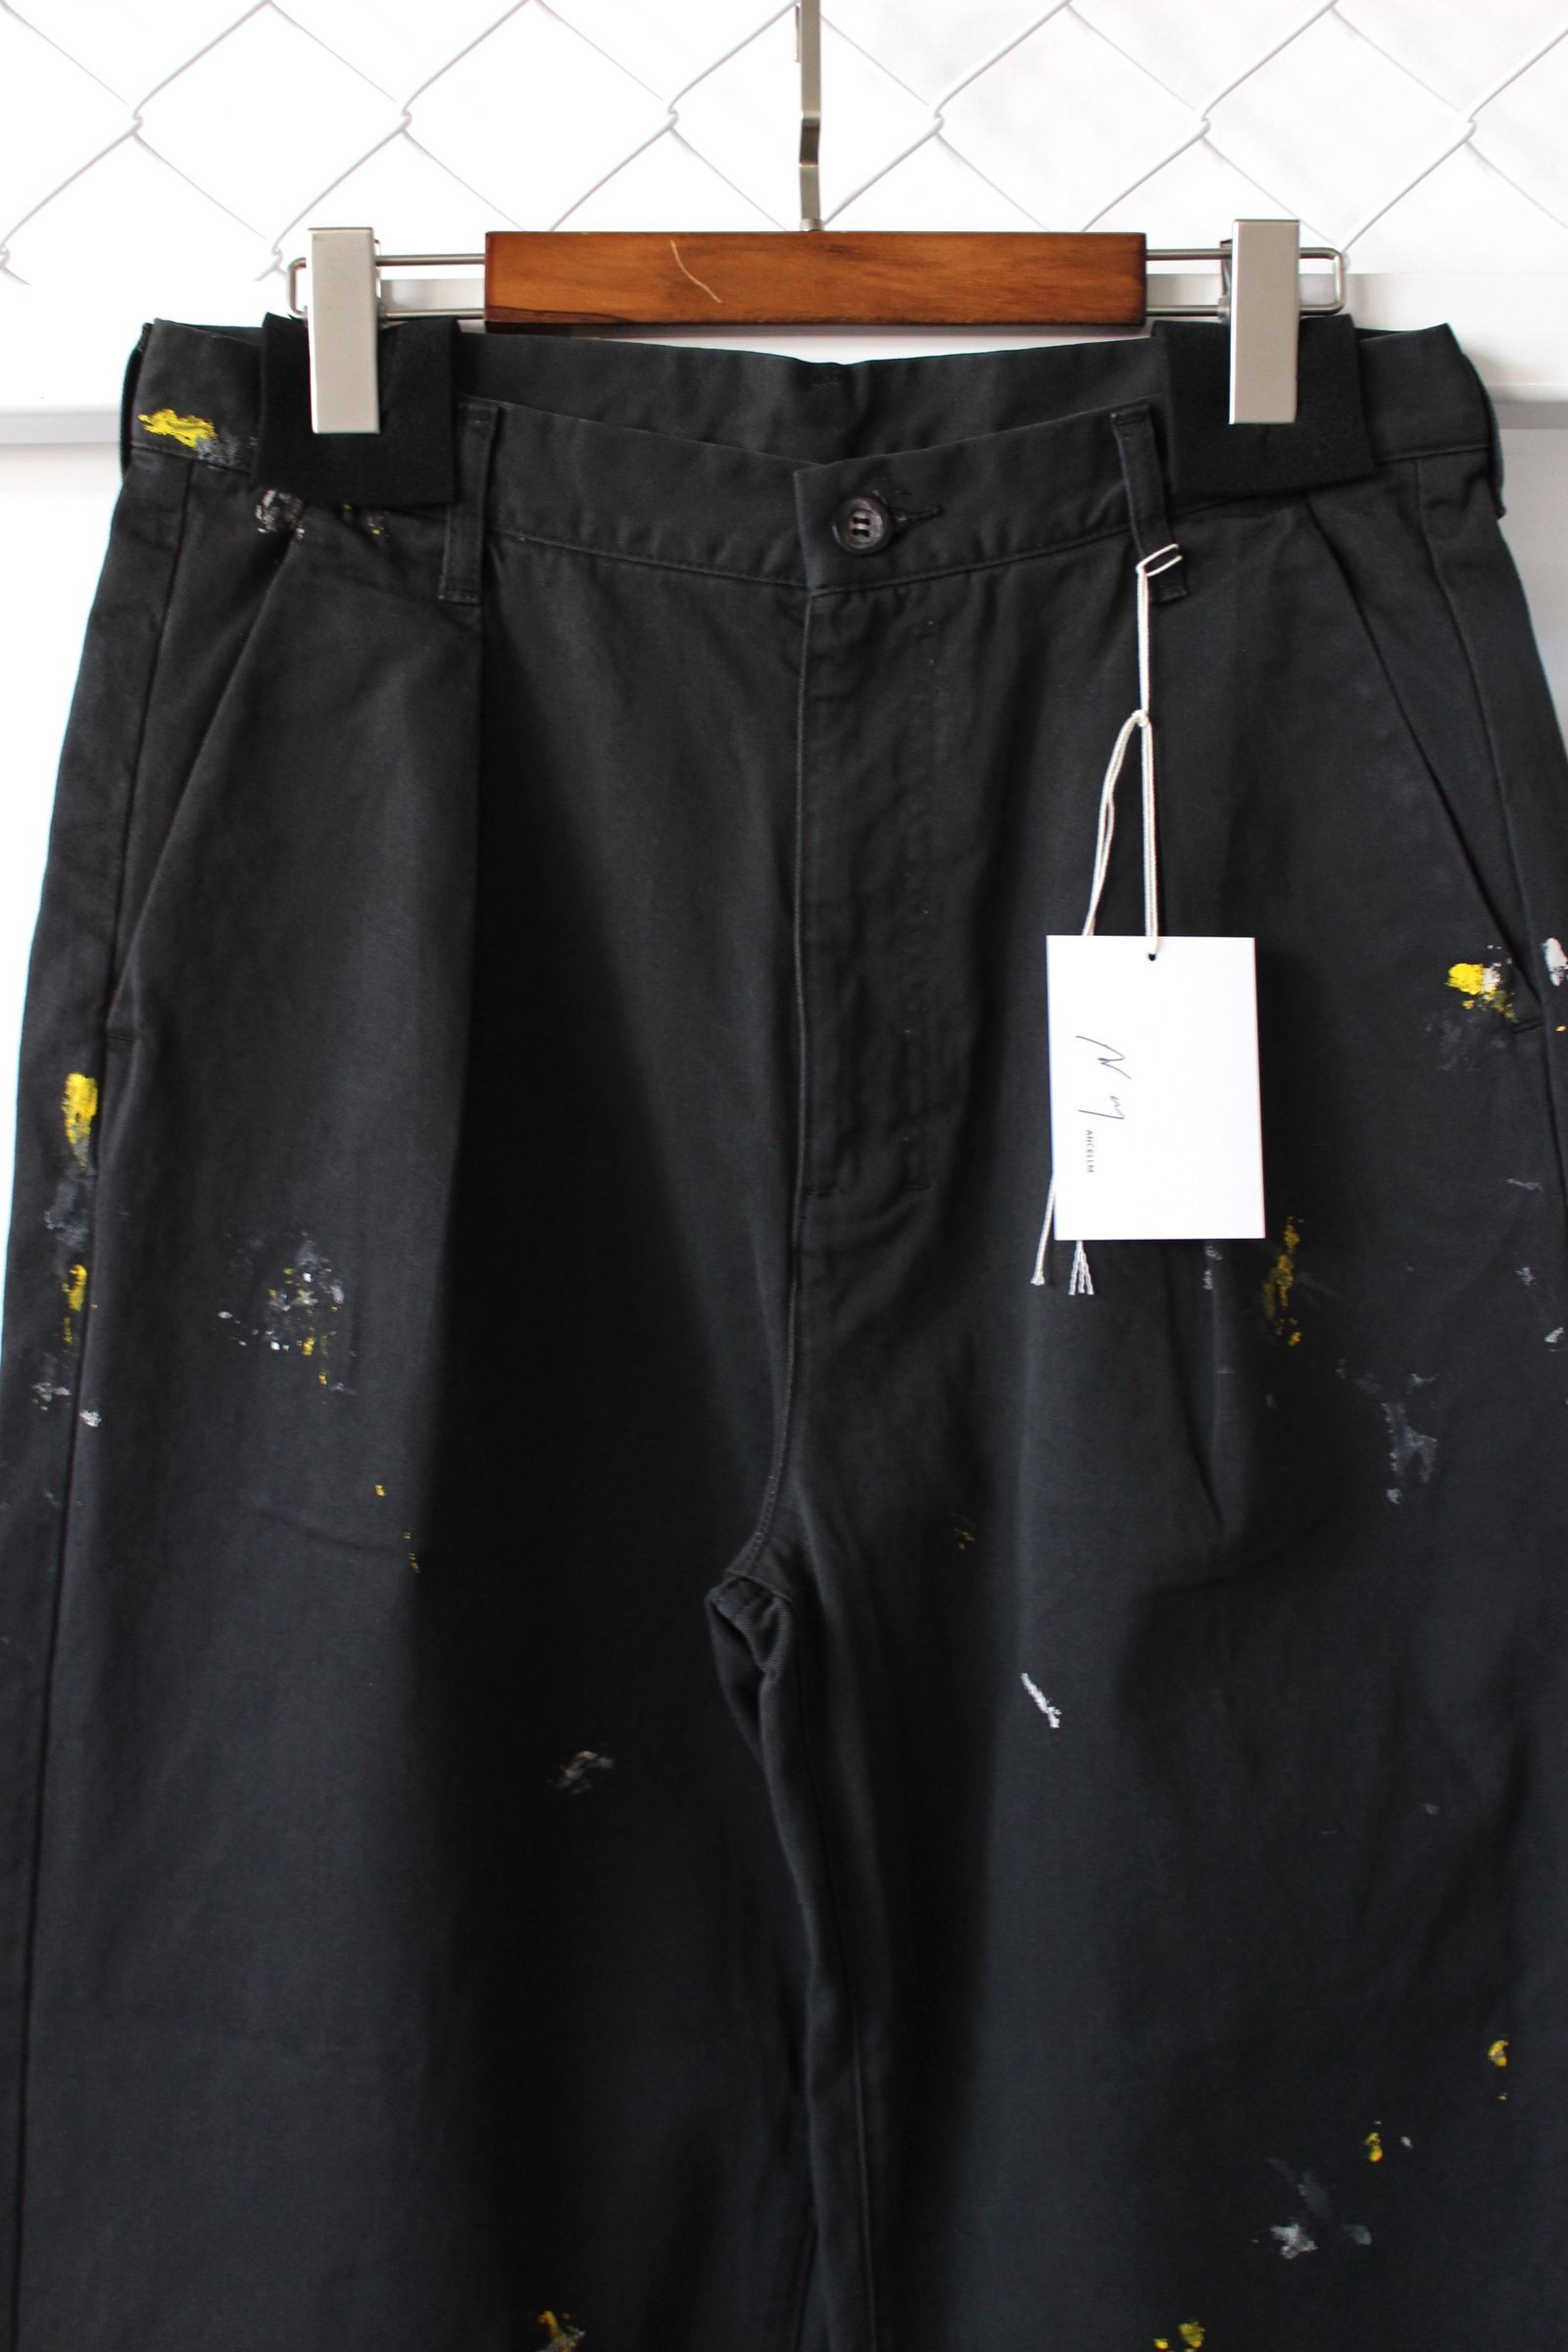 ANCELLM アンセルム PAINT CHINO TROUSERS 黒 2-